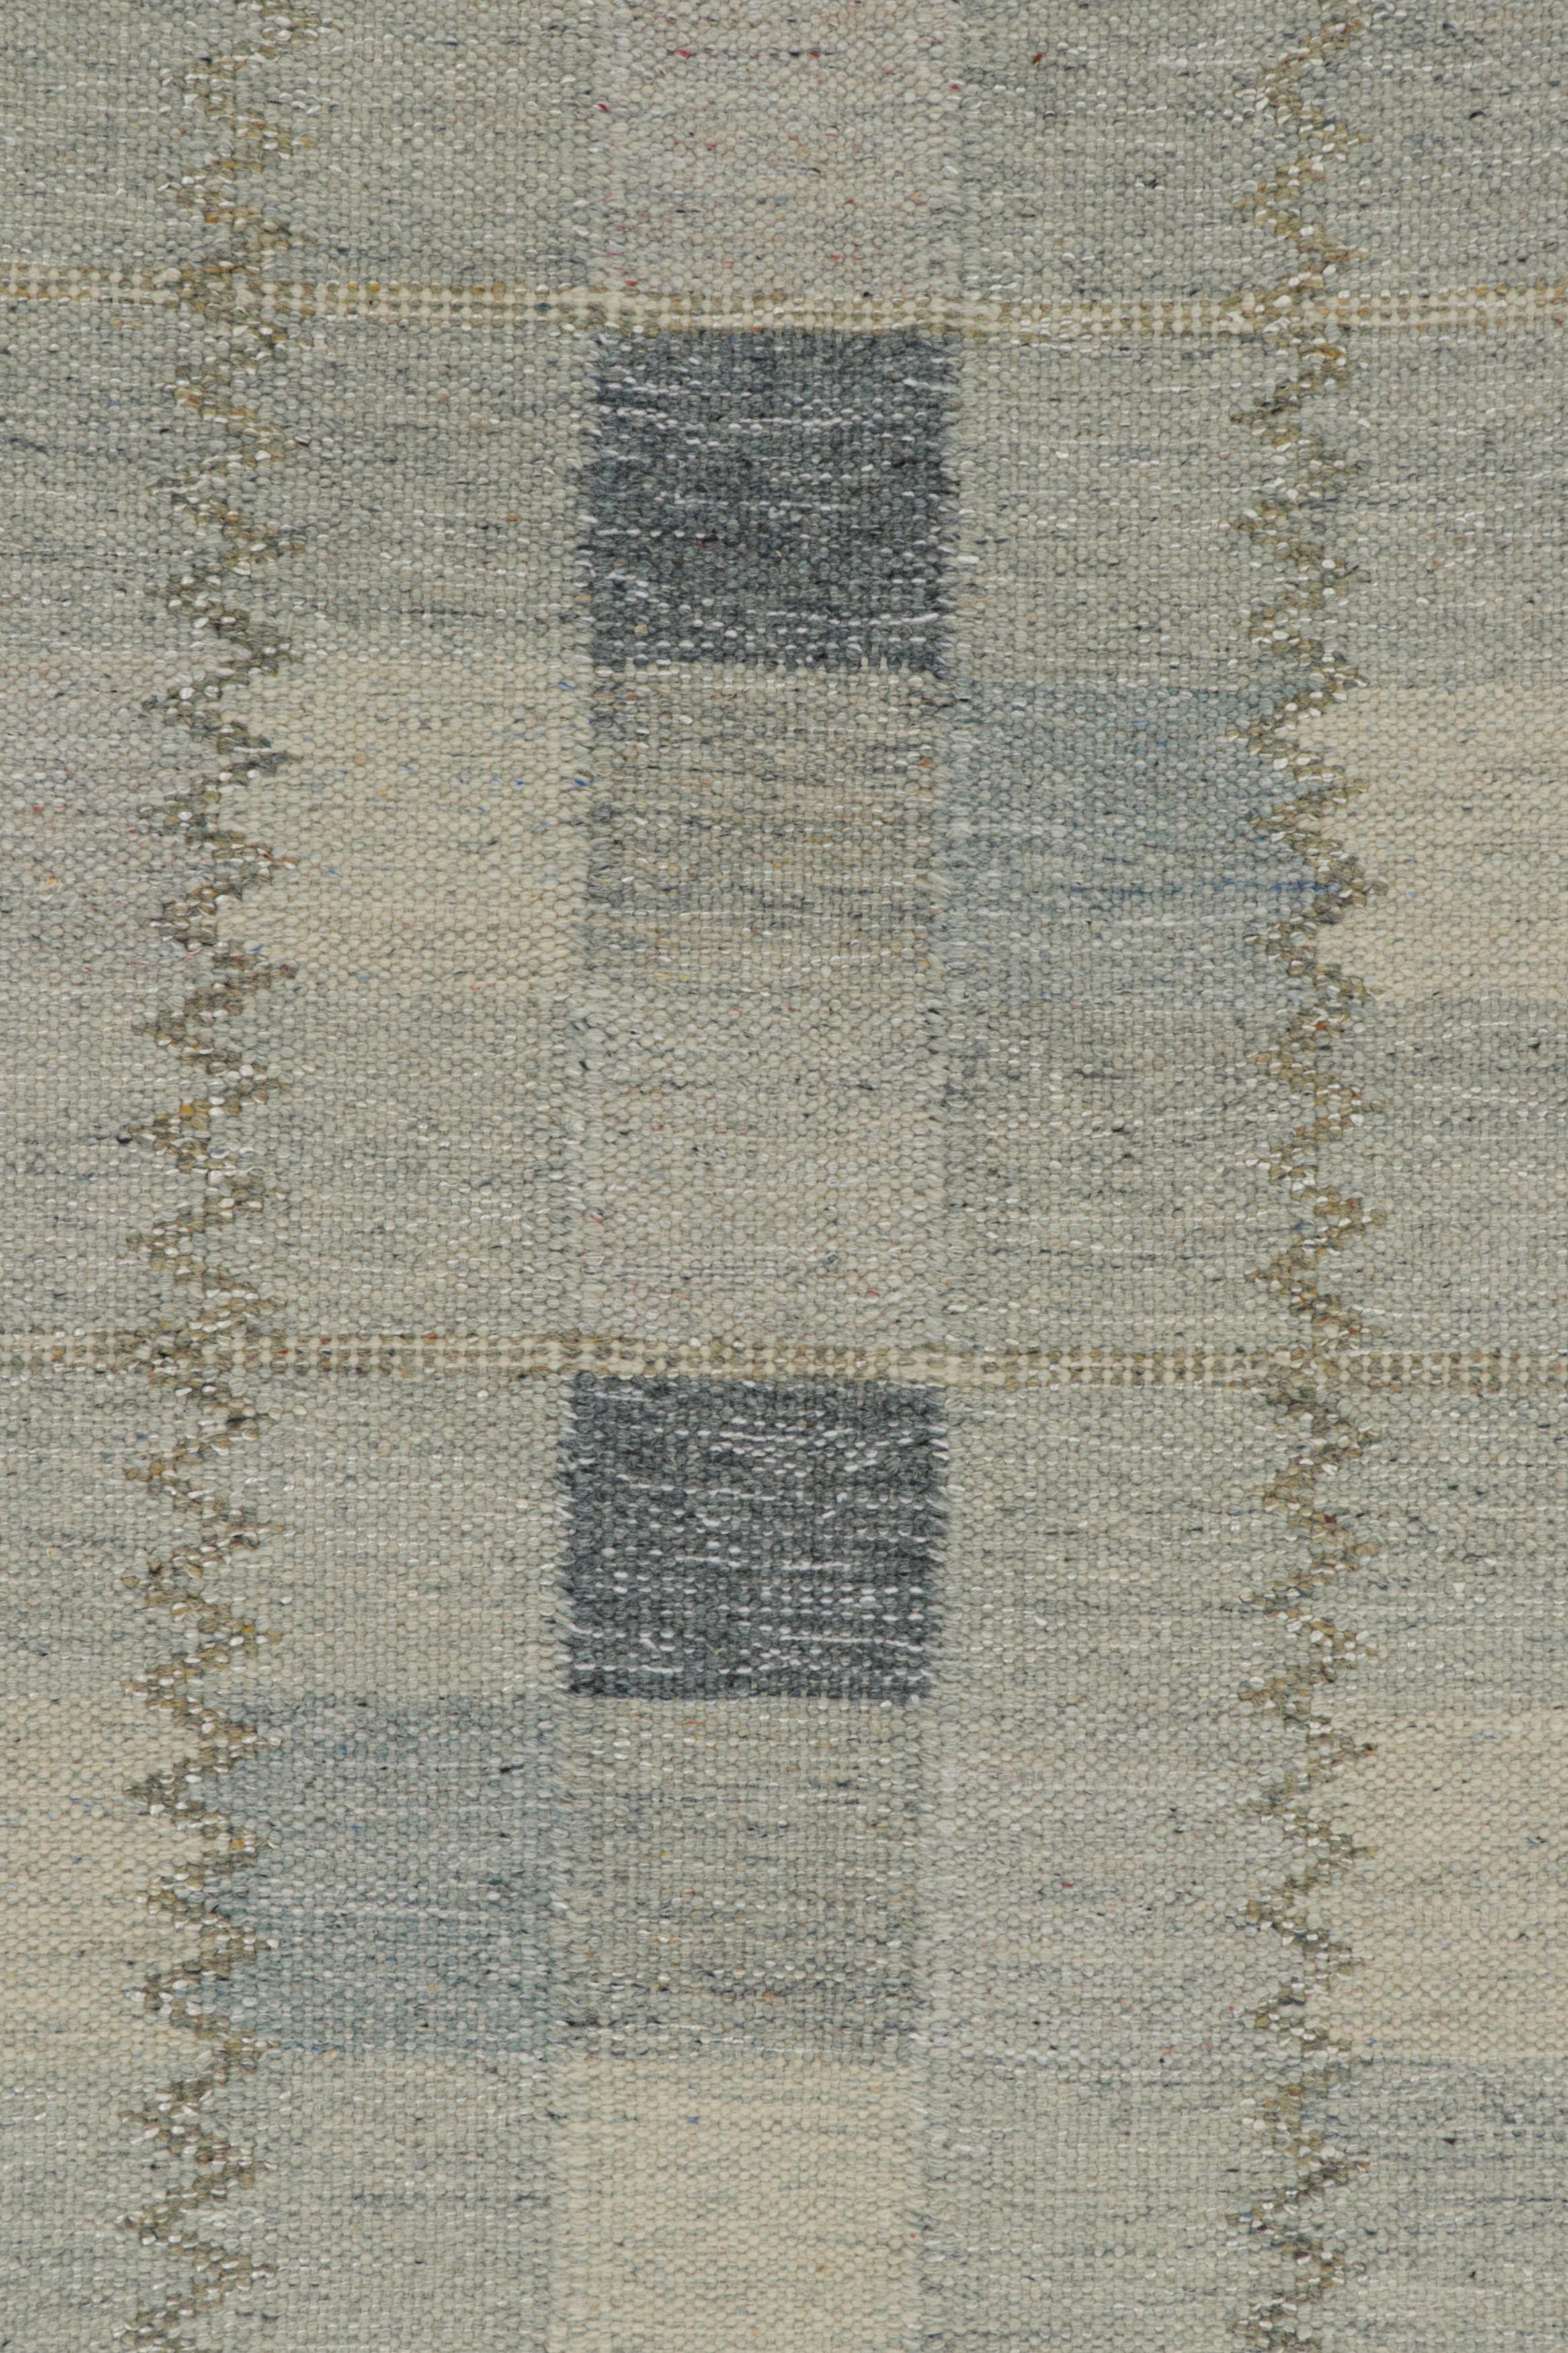 Rug & Kilim’s Scandinavian Style Kilim in Blue-Grey Geometric Patterns In New Condition For Sale In Long Island City, NY